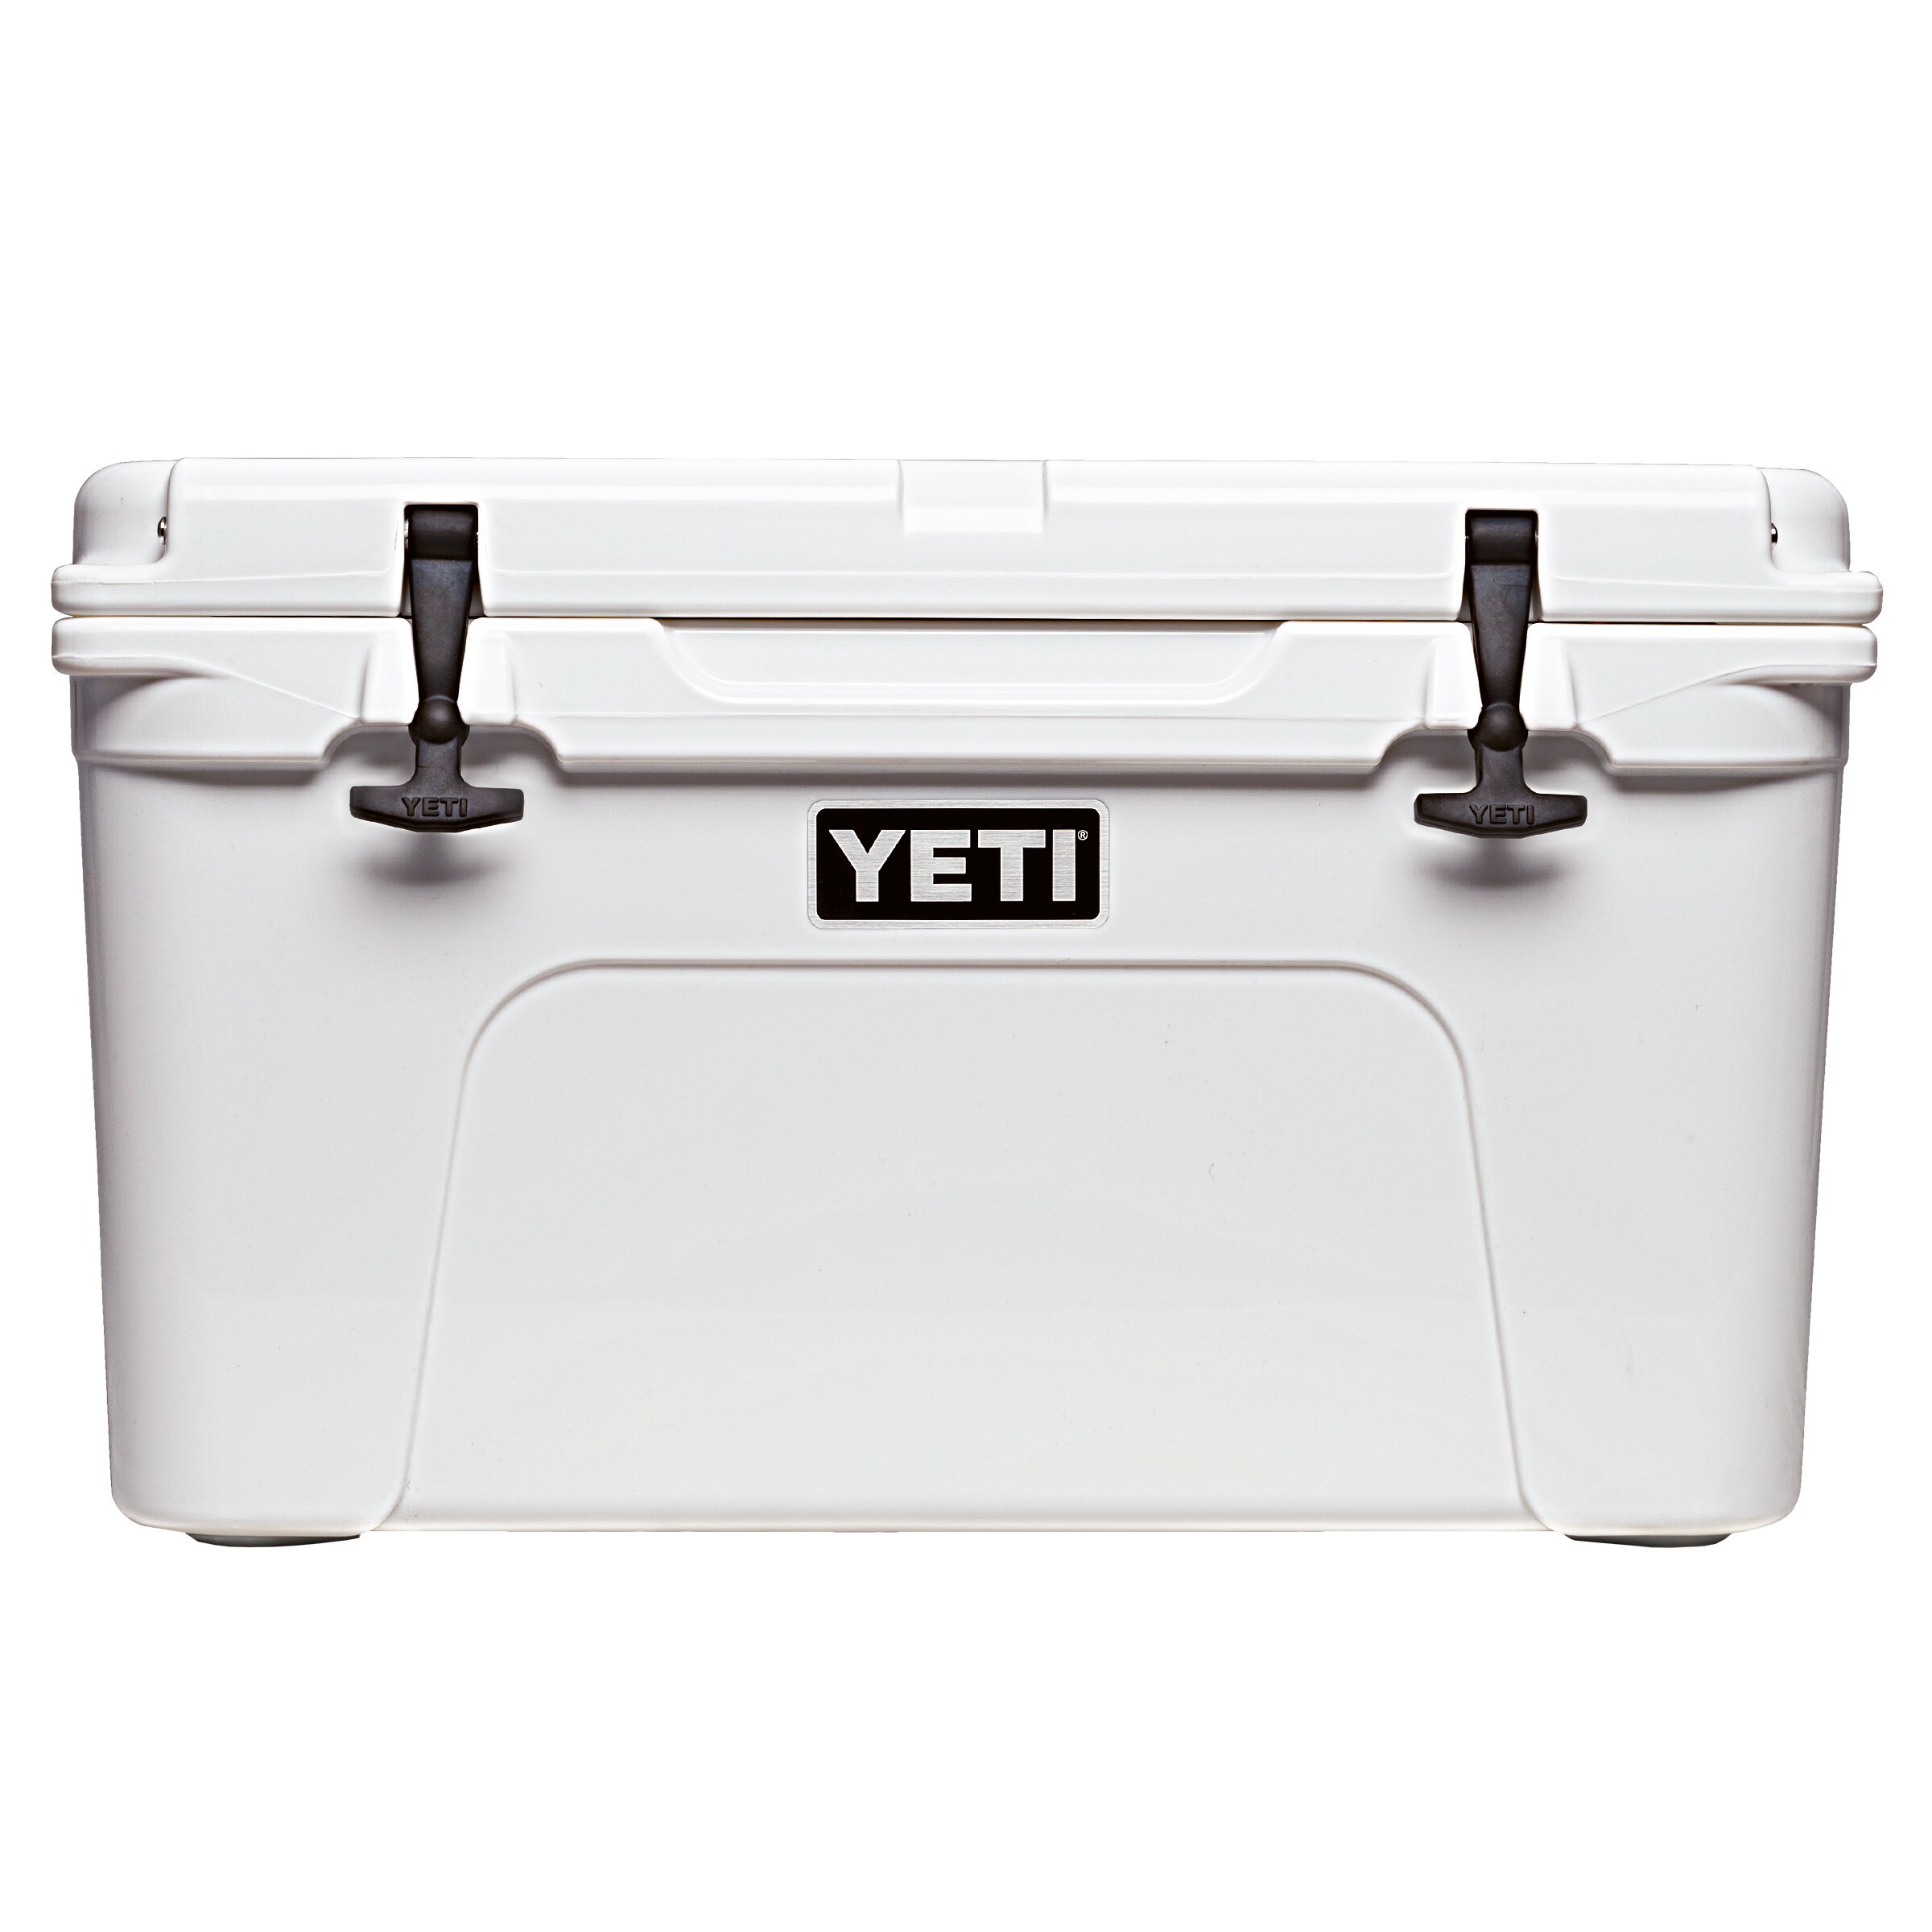 YETI Tundra 45 Insulated Chest Cooler, White at Lowes.com